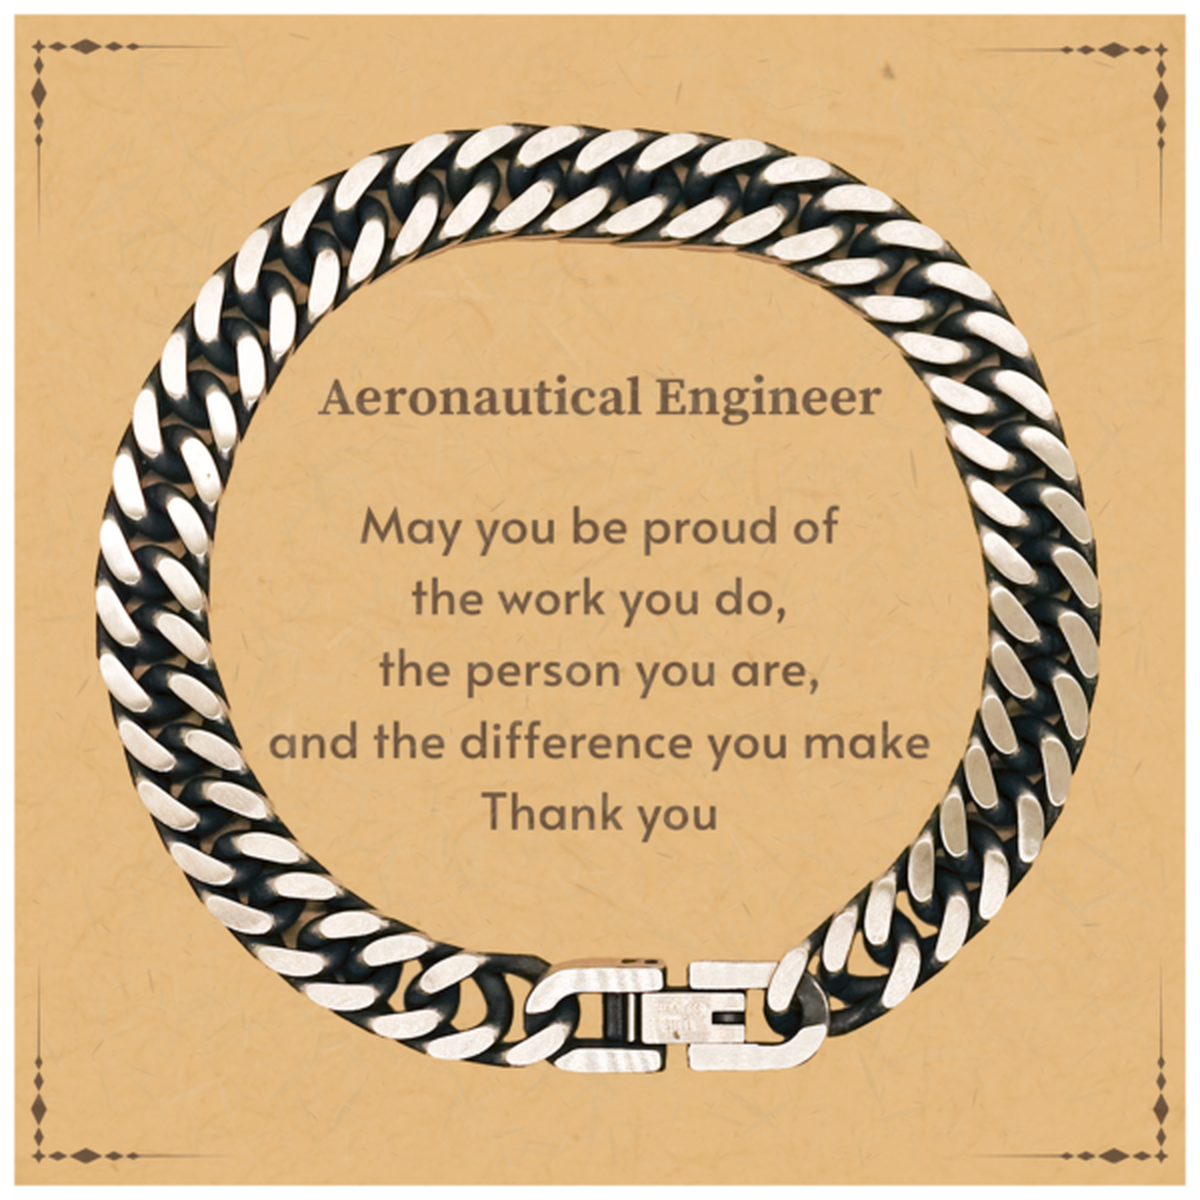 Heartwarming Cuban Link Chain Bracelet Retirement Coworkers Gifts for Aeronautical Engineer, Aeronautical Engineer May You be proud of the work you do, the person you are Gifts for Boss Men Women Friends